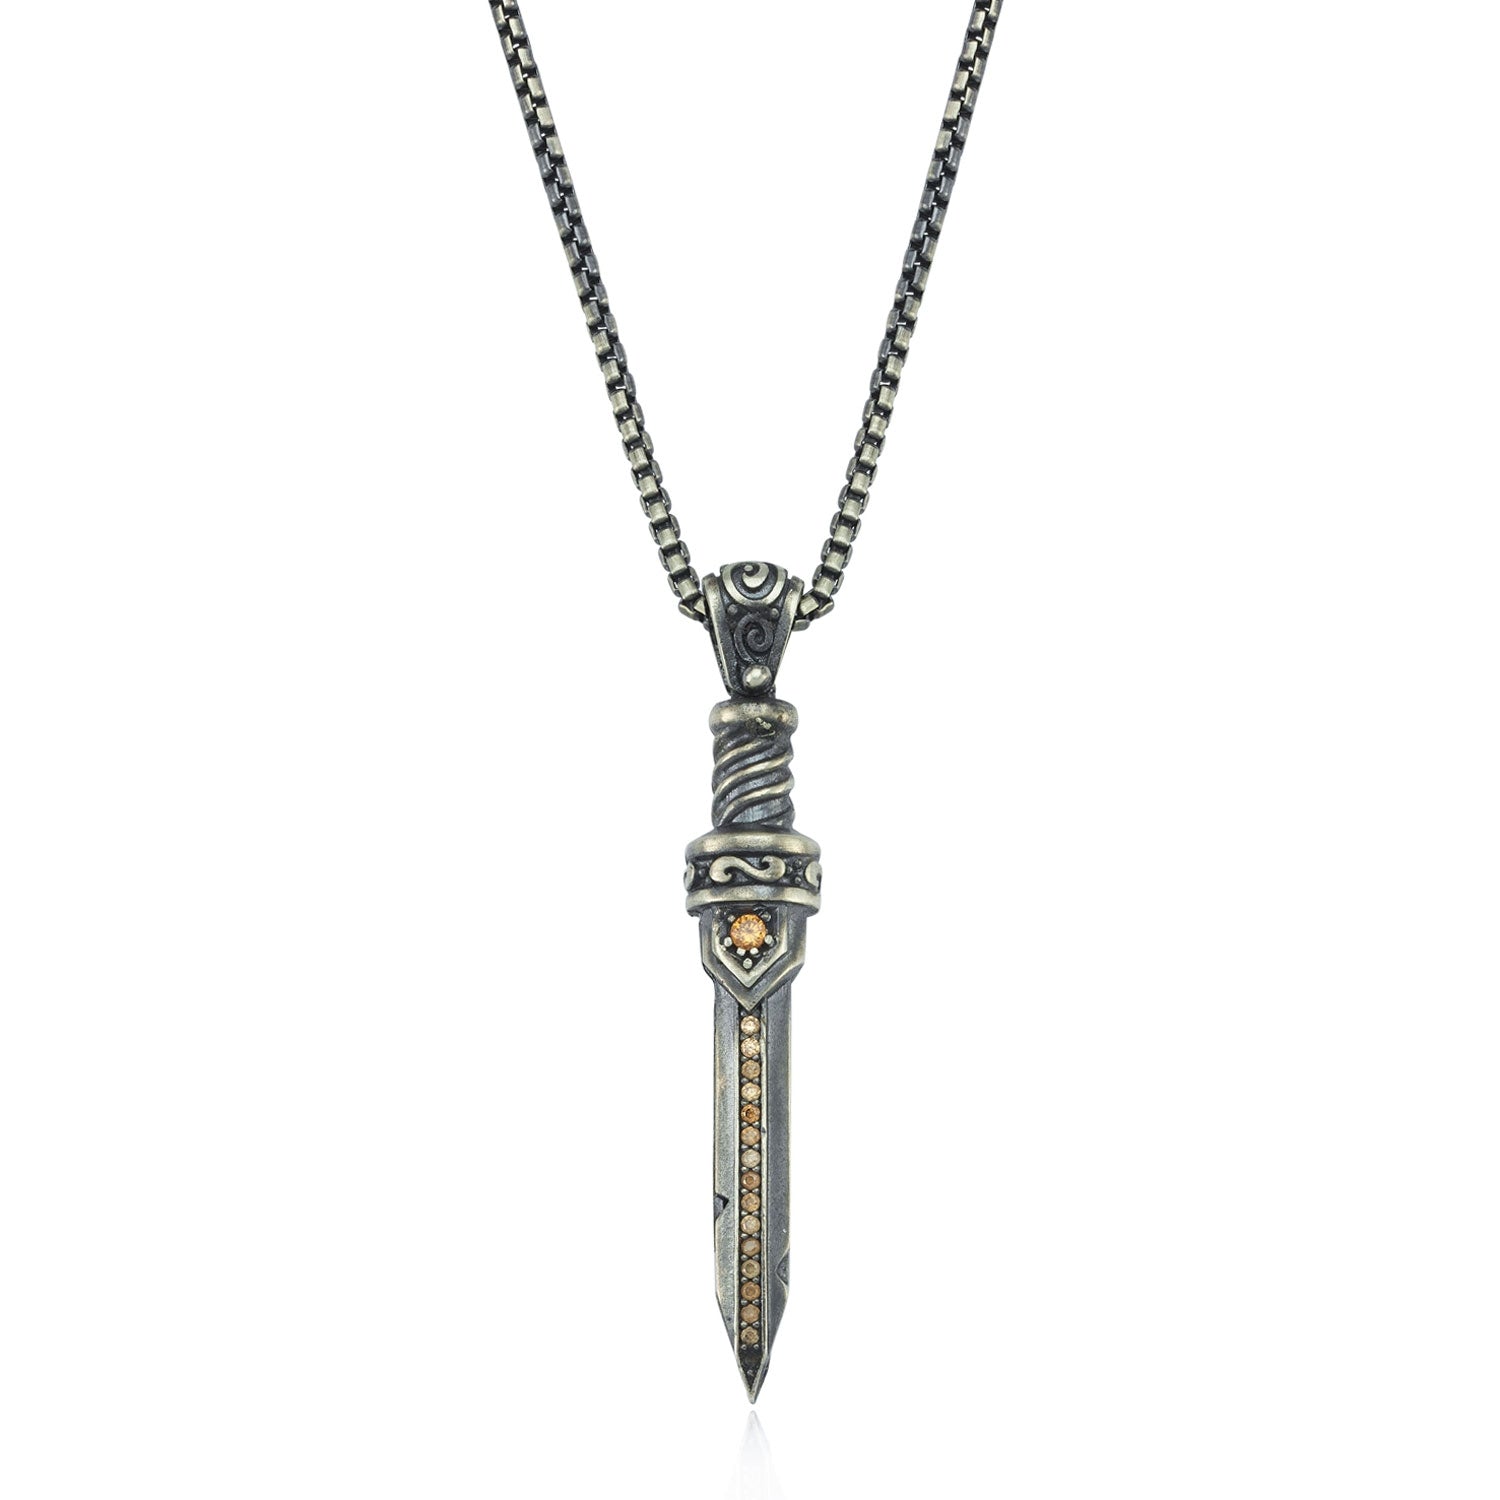 RARE PRINCE by CARAT SUTRA | Unique Designed Sword Pendant Studded with Cubic Zircons for Men | 925 Sterling Silver Oxidized Pendant | Men's Jewelry | With Certificate of Authenticity and 925 Hallmark - caratsutra